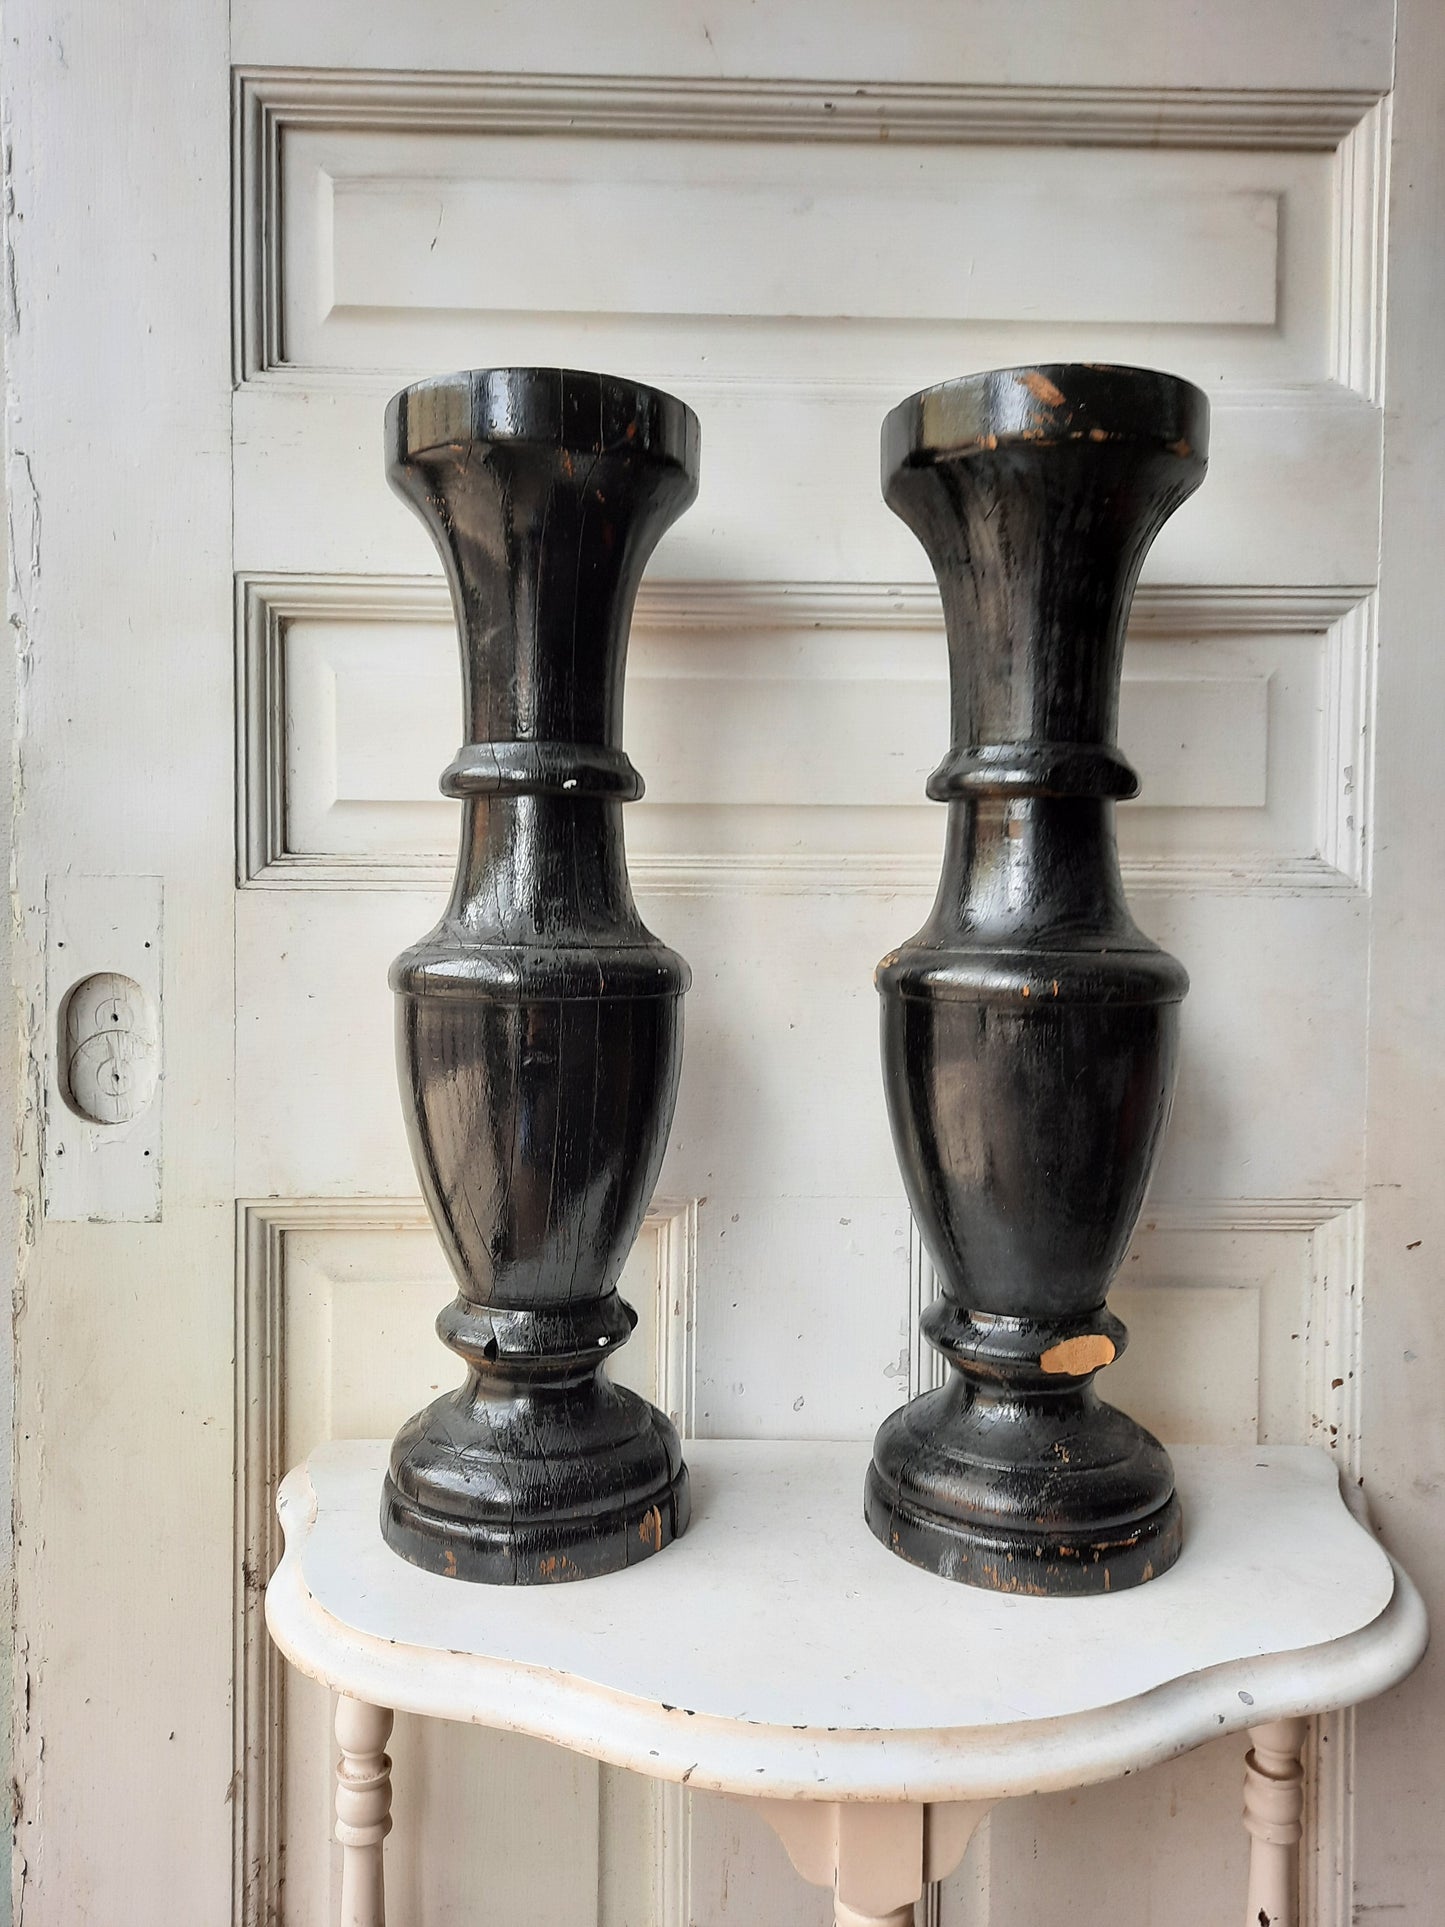 Pair of Large Balusters or Pedestal Bases, Antique Turned Wood Bases